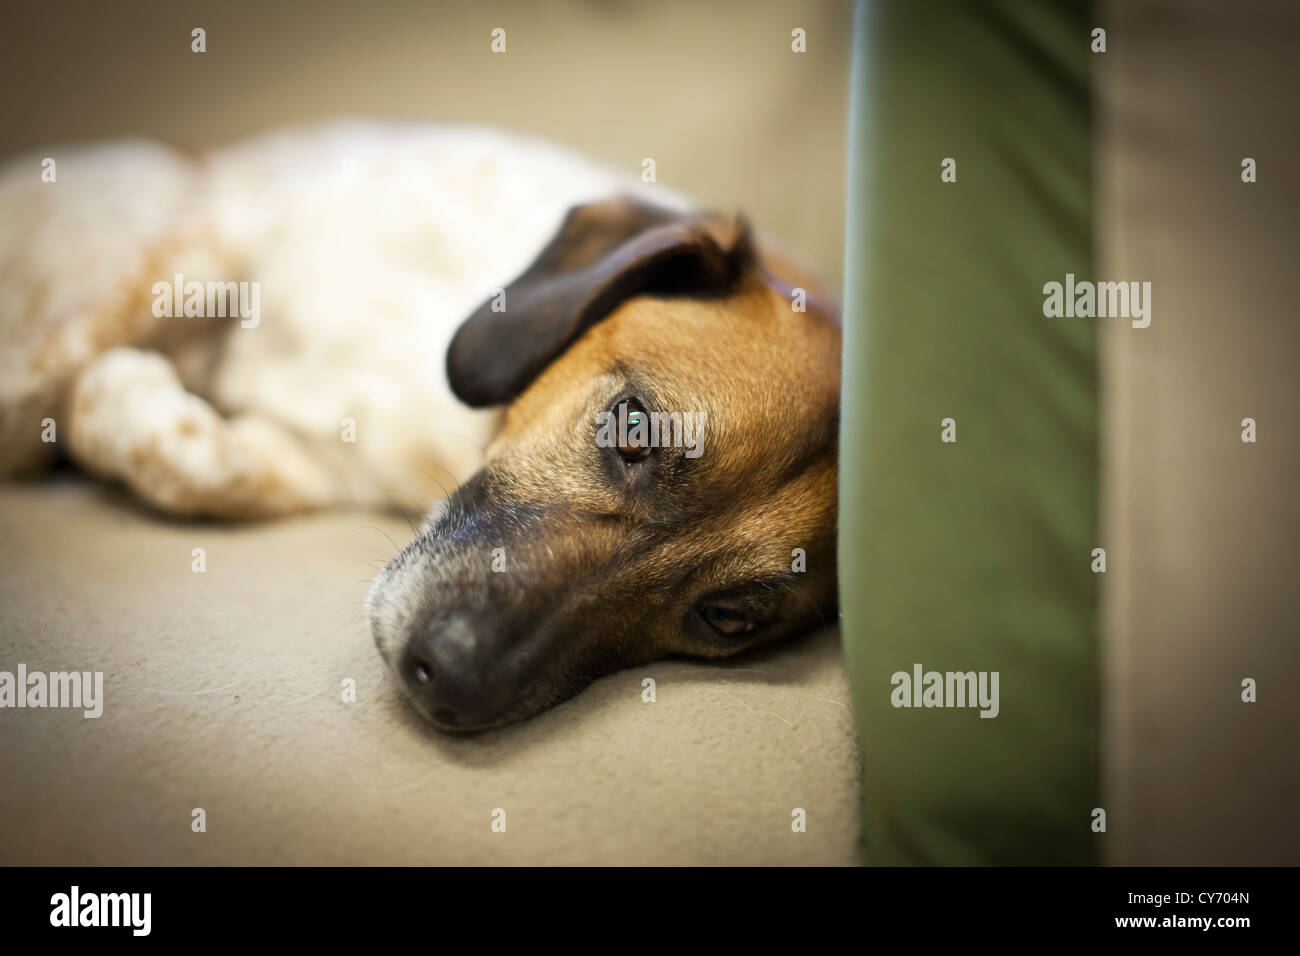 Close up of a dog laying in a sofa with a sad expression. Stock Photo